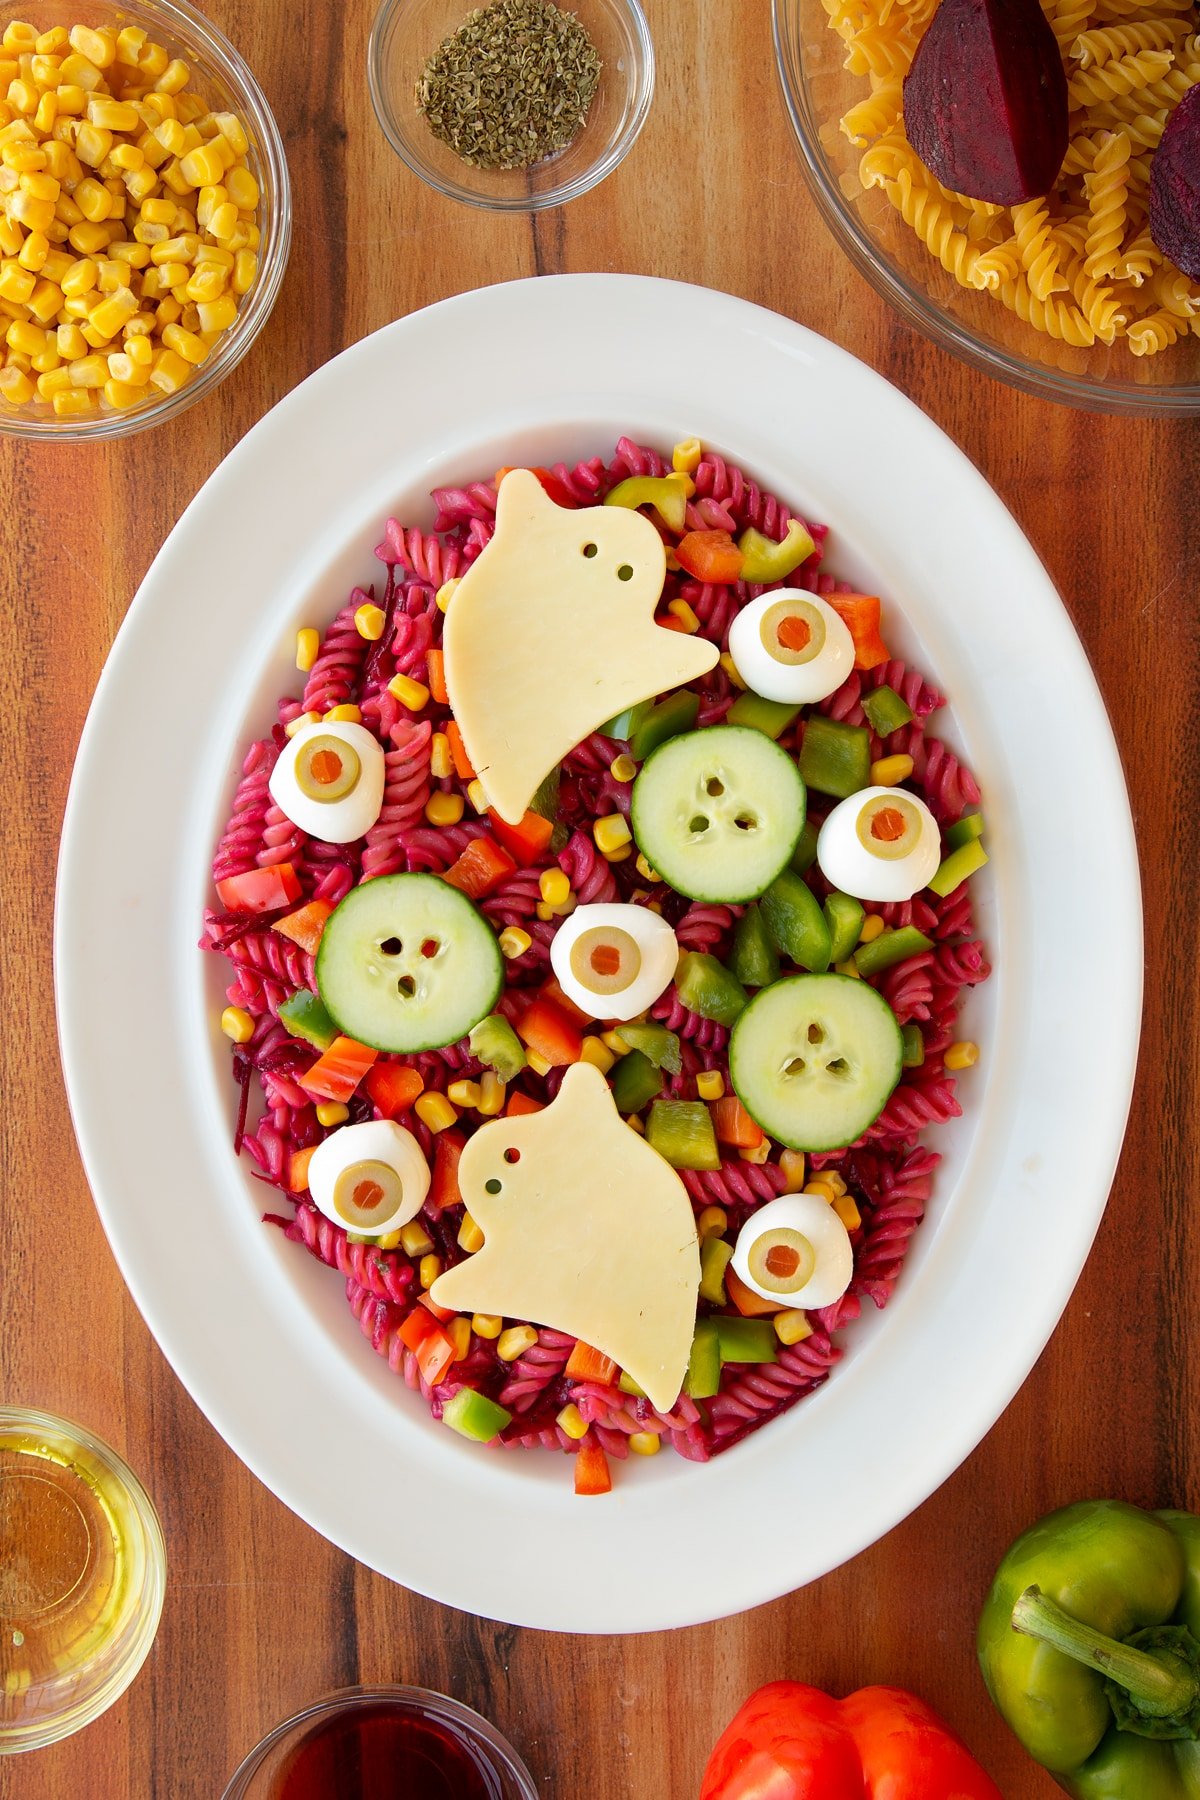 Adding the veggie and cheese monsters to the top of the finished halloween salad.